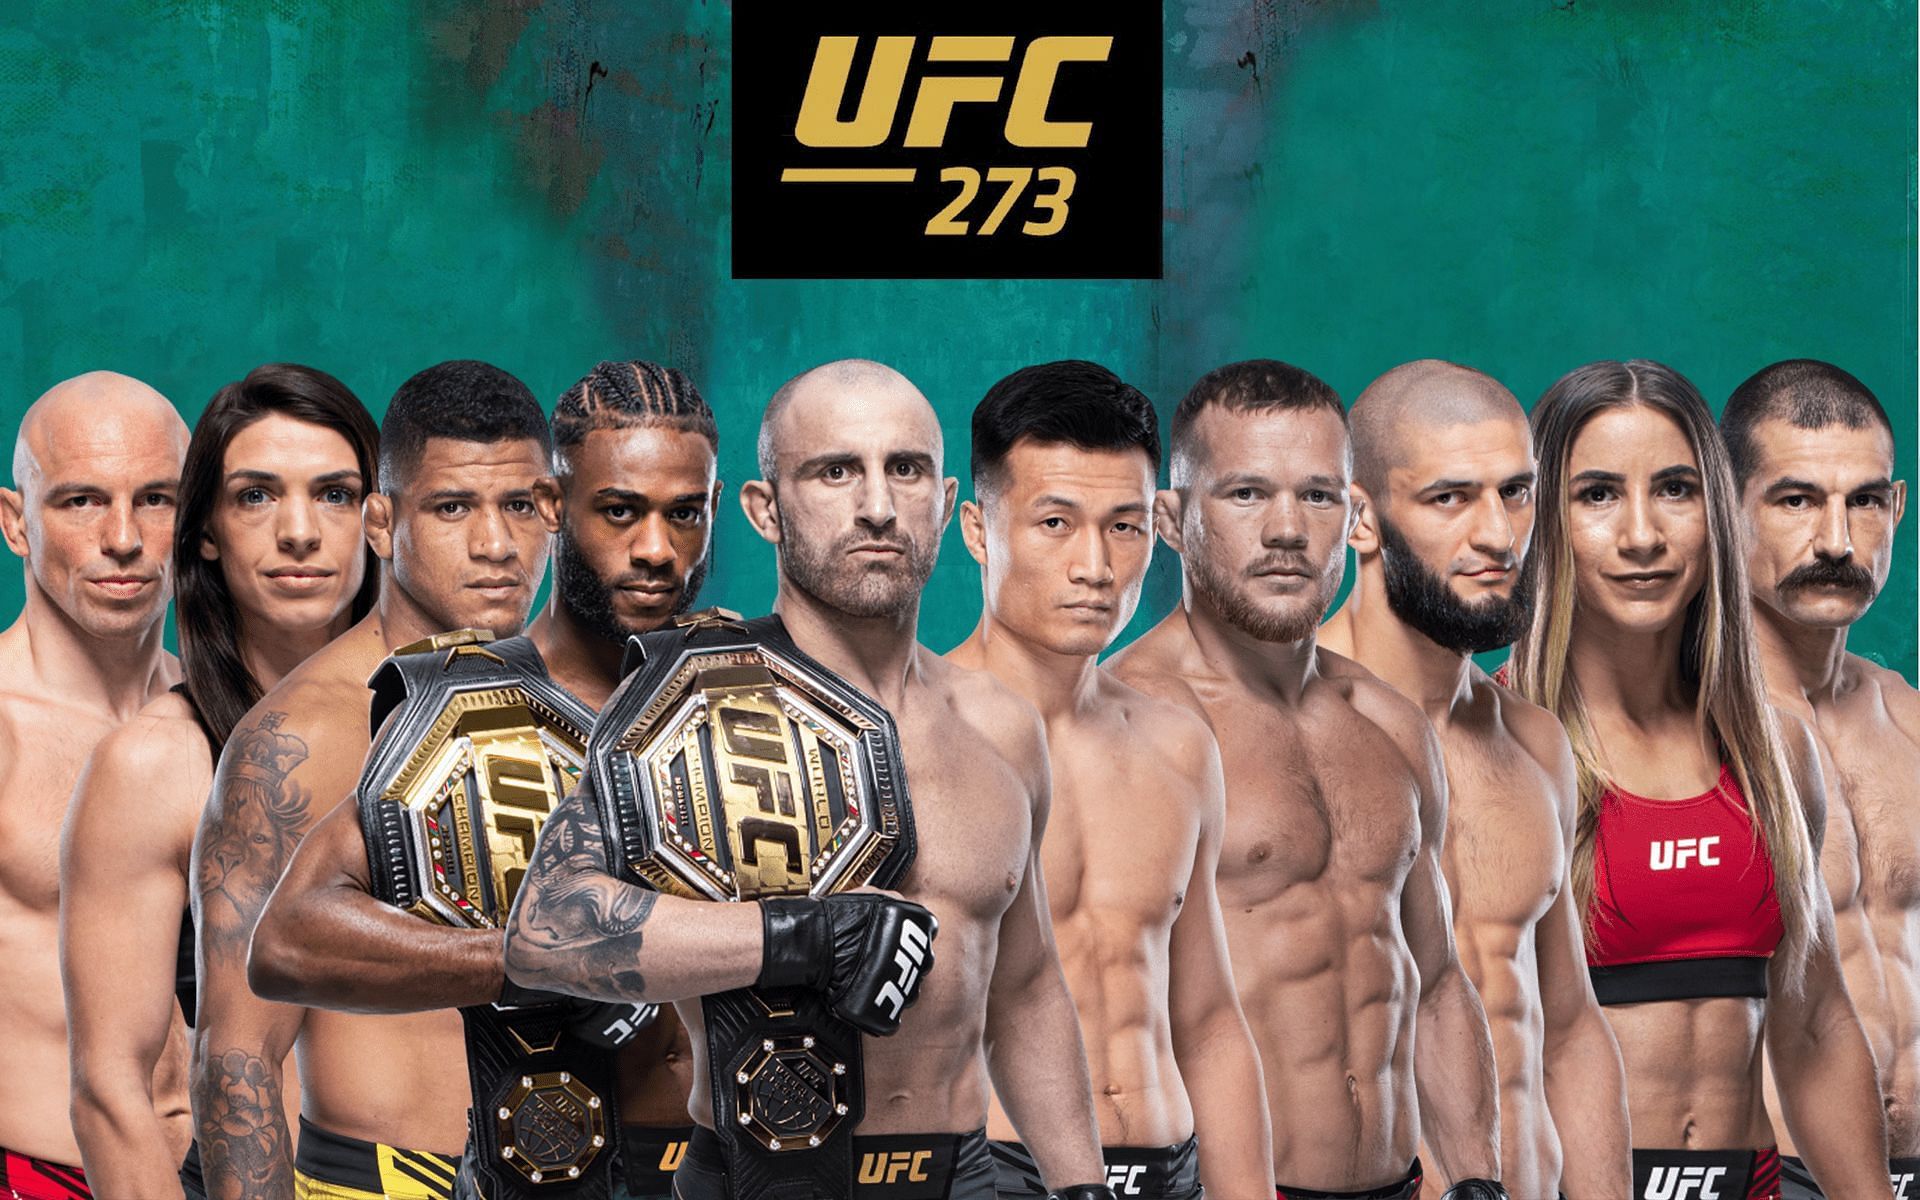 UFC 273 main card results and highlights [Image credits: ufc.com]